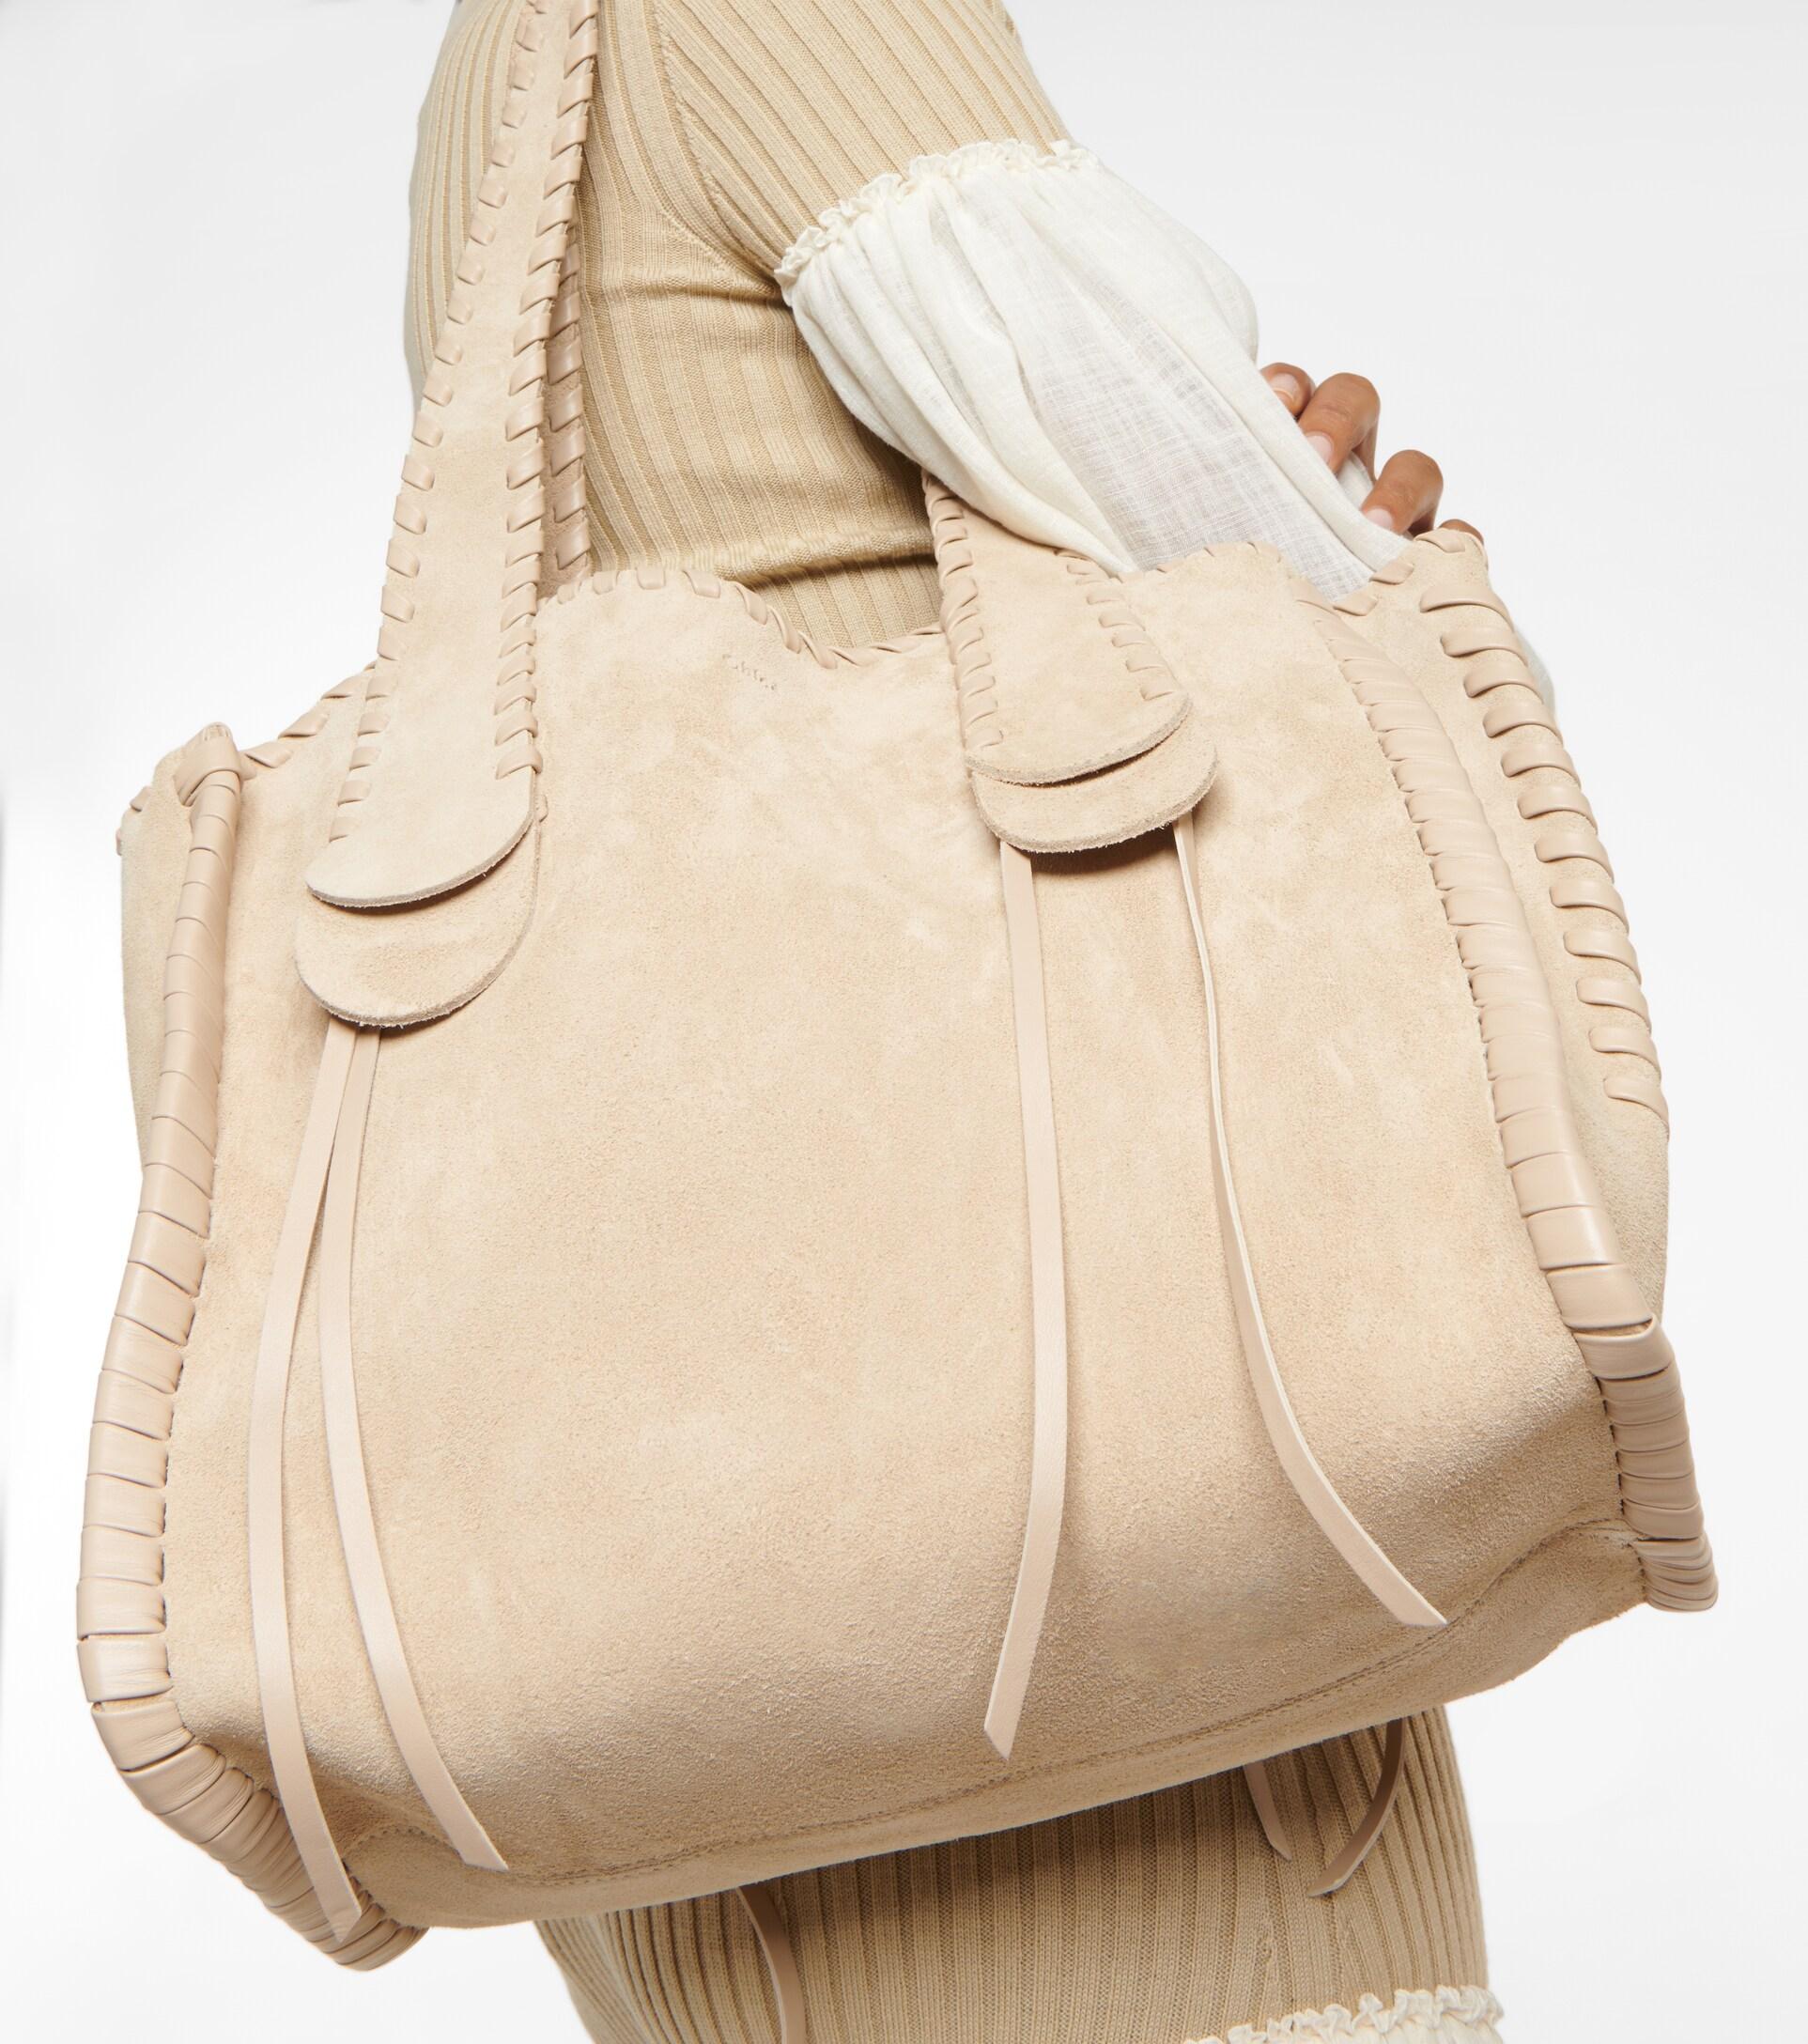 Chloé Chloe Mony Small Suede Tote Bag in Natural | Lyst